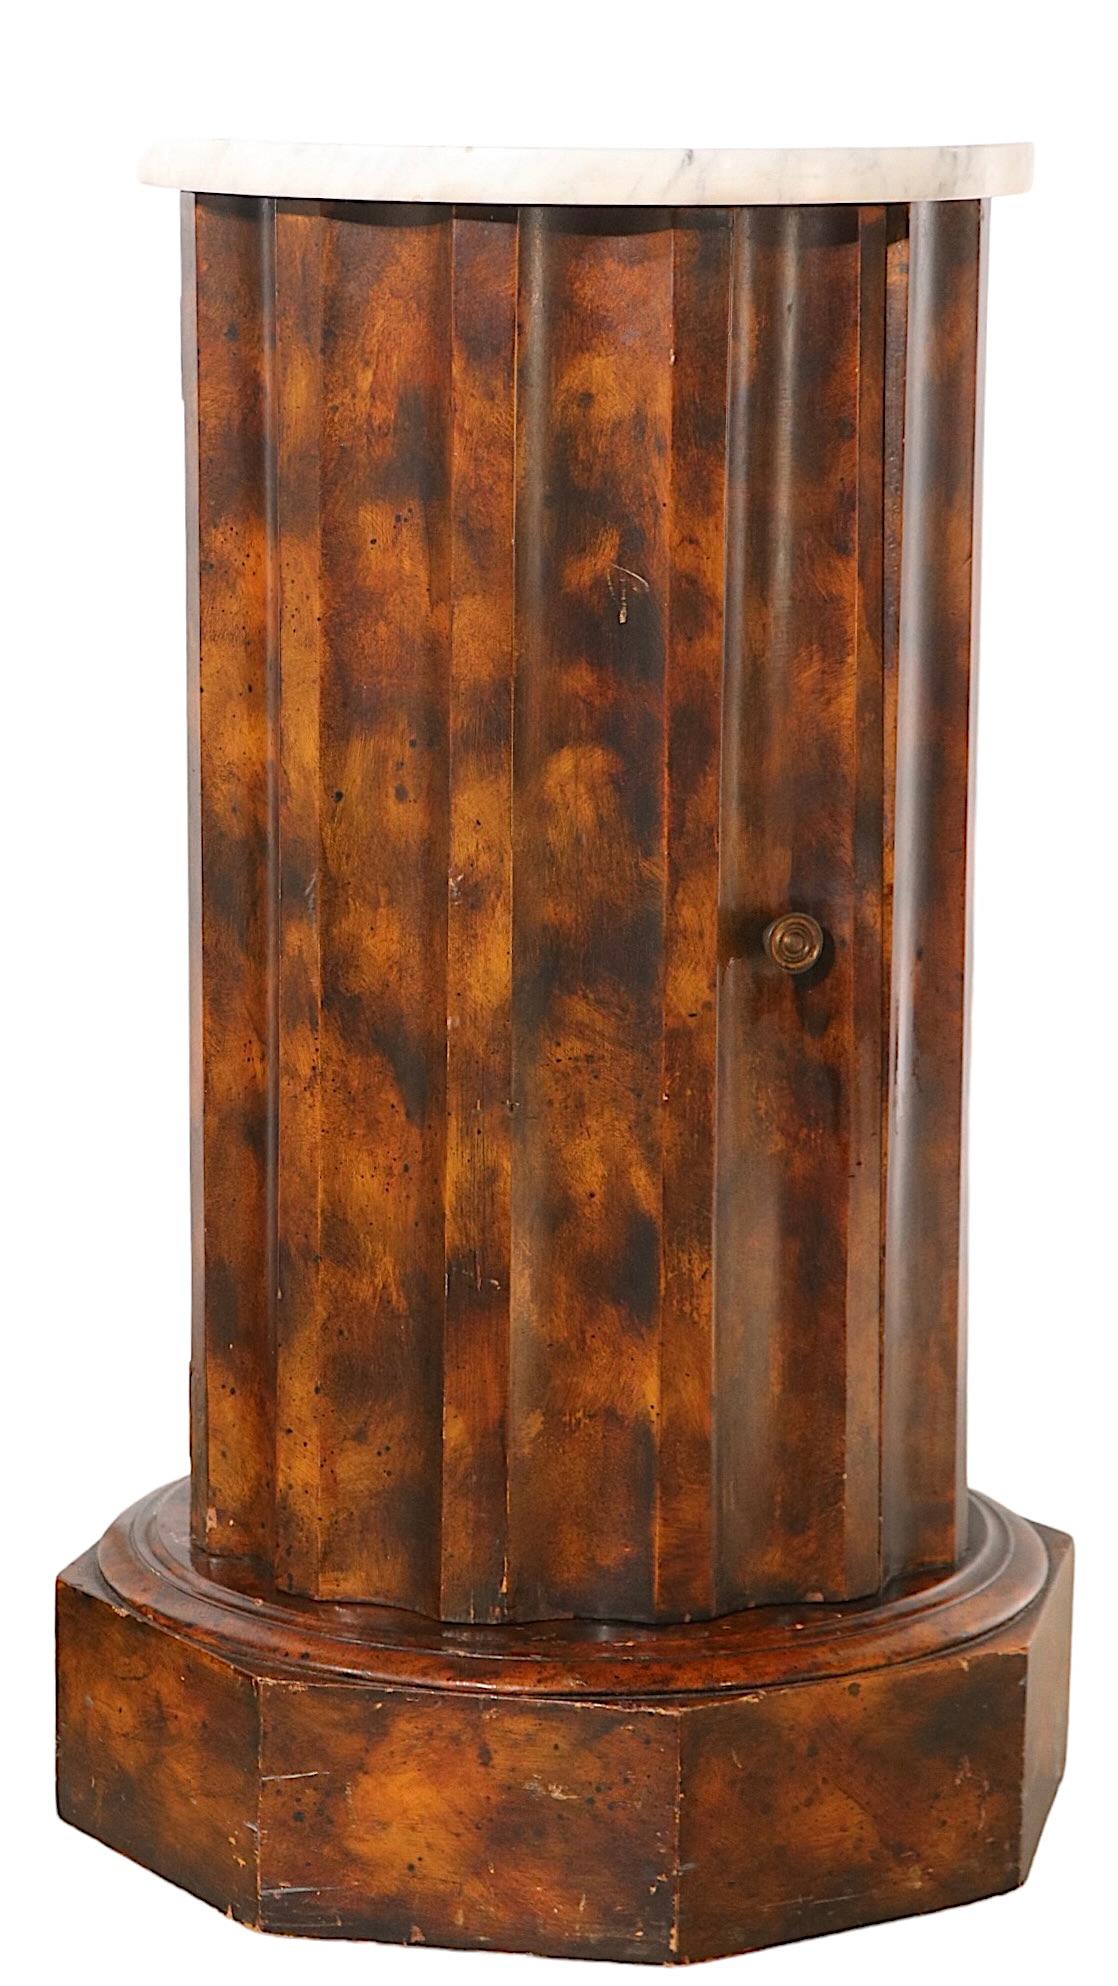 Pr. Decorative Marble Top Half Column Pedestals in Faux Tortoise Shell Finish For Sale 1